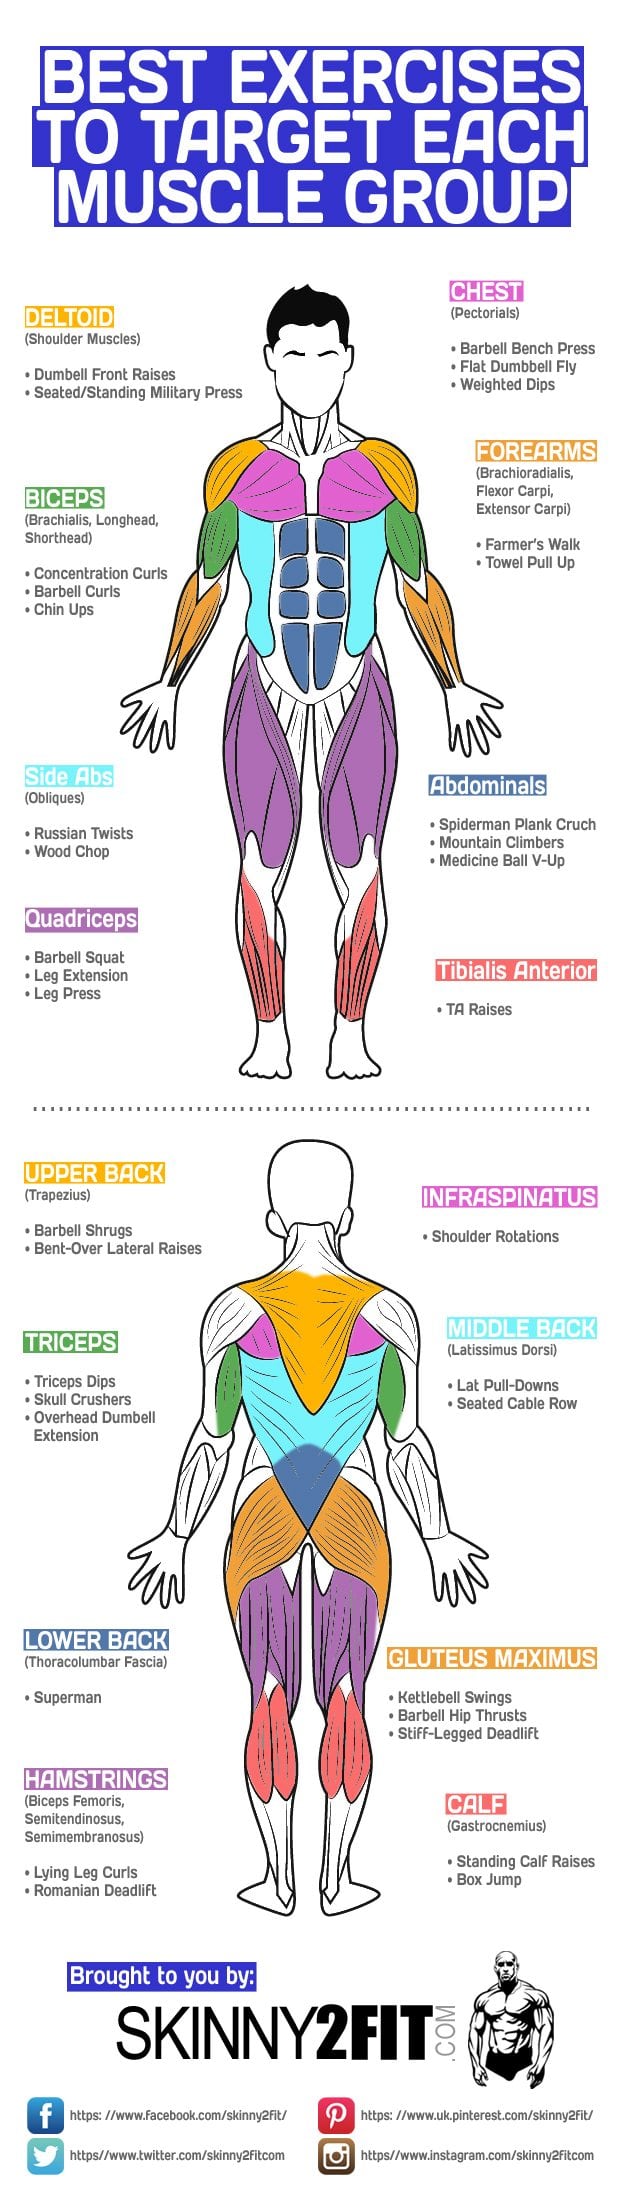 Target Each Muscle Group